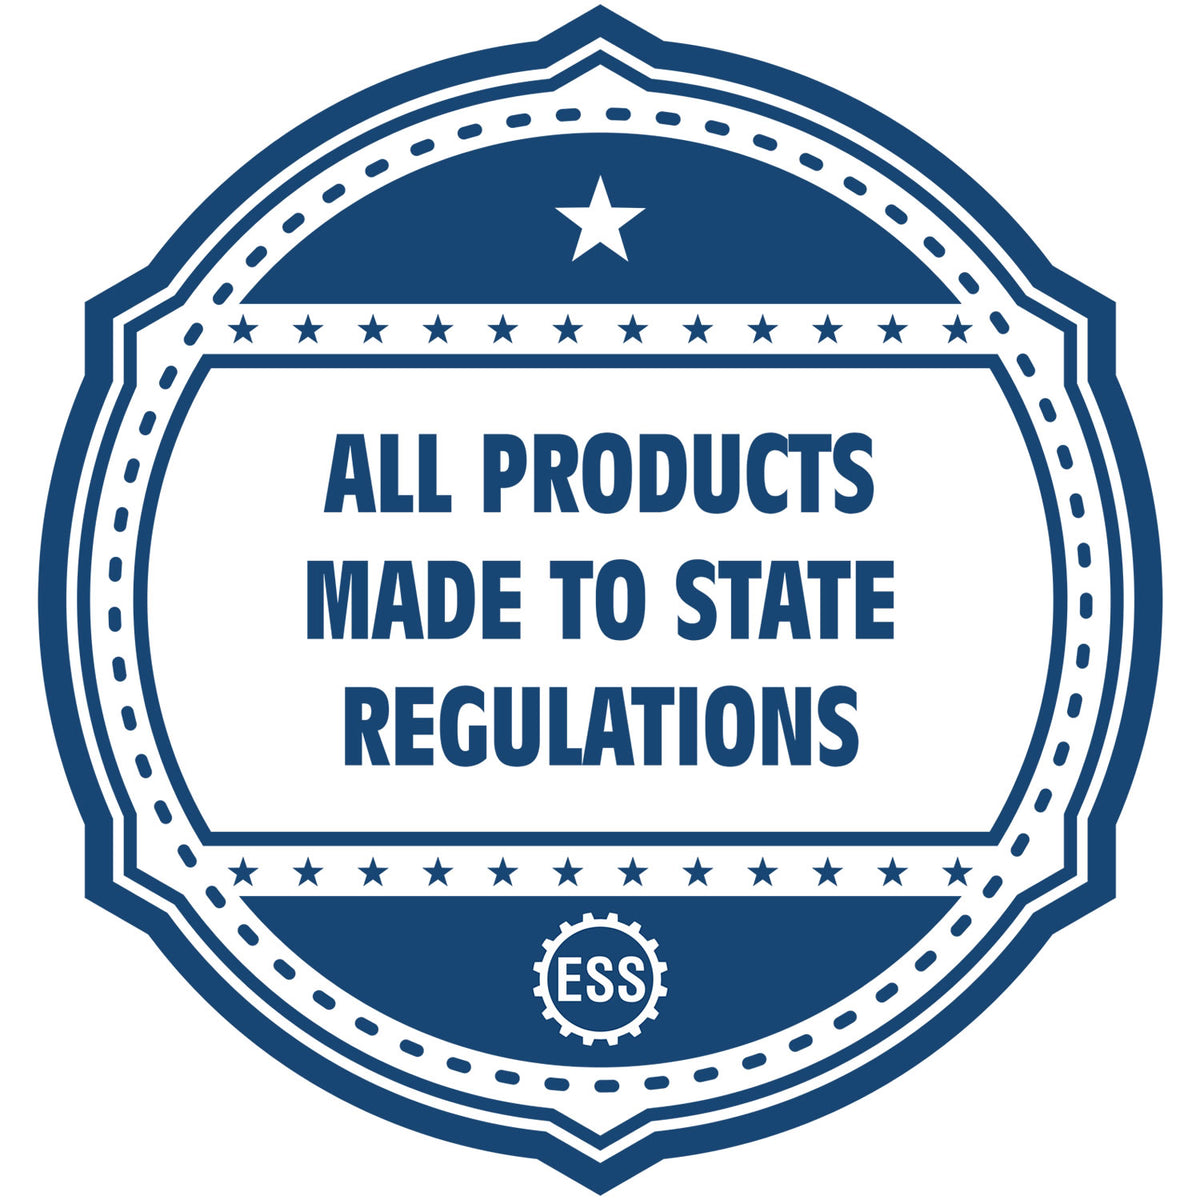 An icon or badge element for the Digital Hawaii Landscape Architect Stamp showing that this product is made in compliance with state regulations.